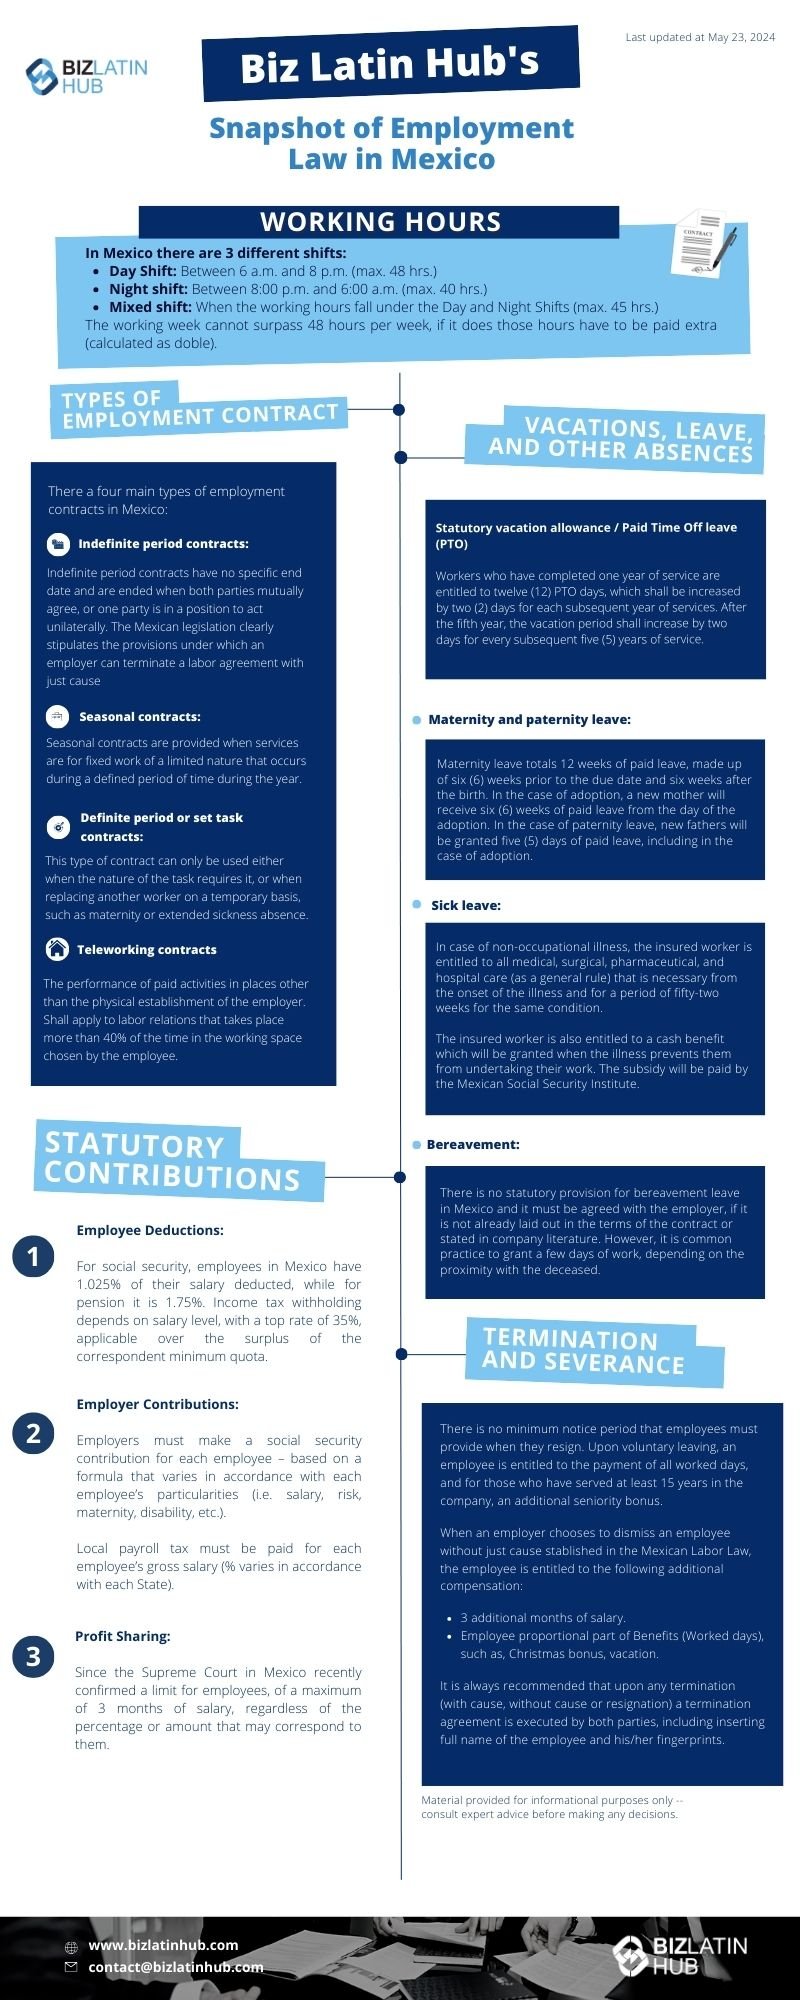 Infographic titled "Biz Latin Hub's Snapshot of Employment Law in Mexico." It covers working hours, employment contract types, vacation, leave, contributions, and termination. The infographic contains text, icons, and section dividers in blue, white, and black colors.